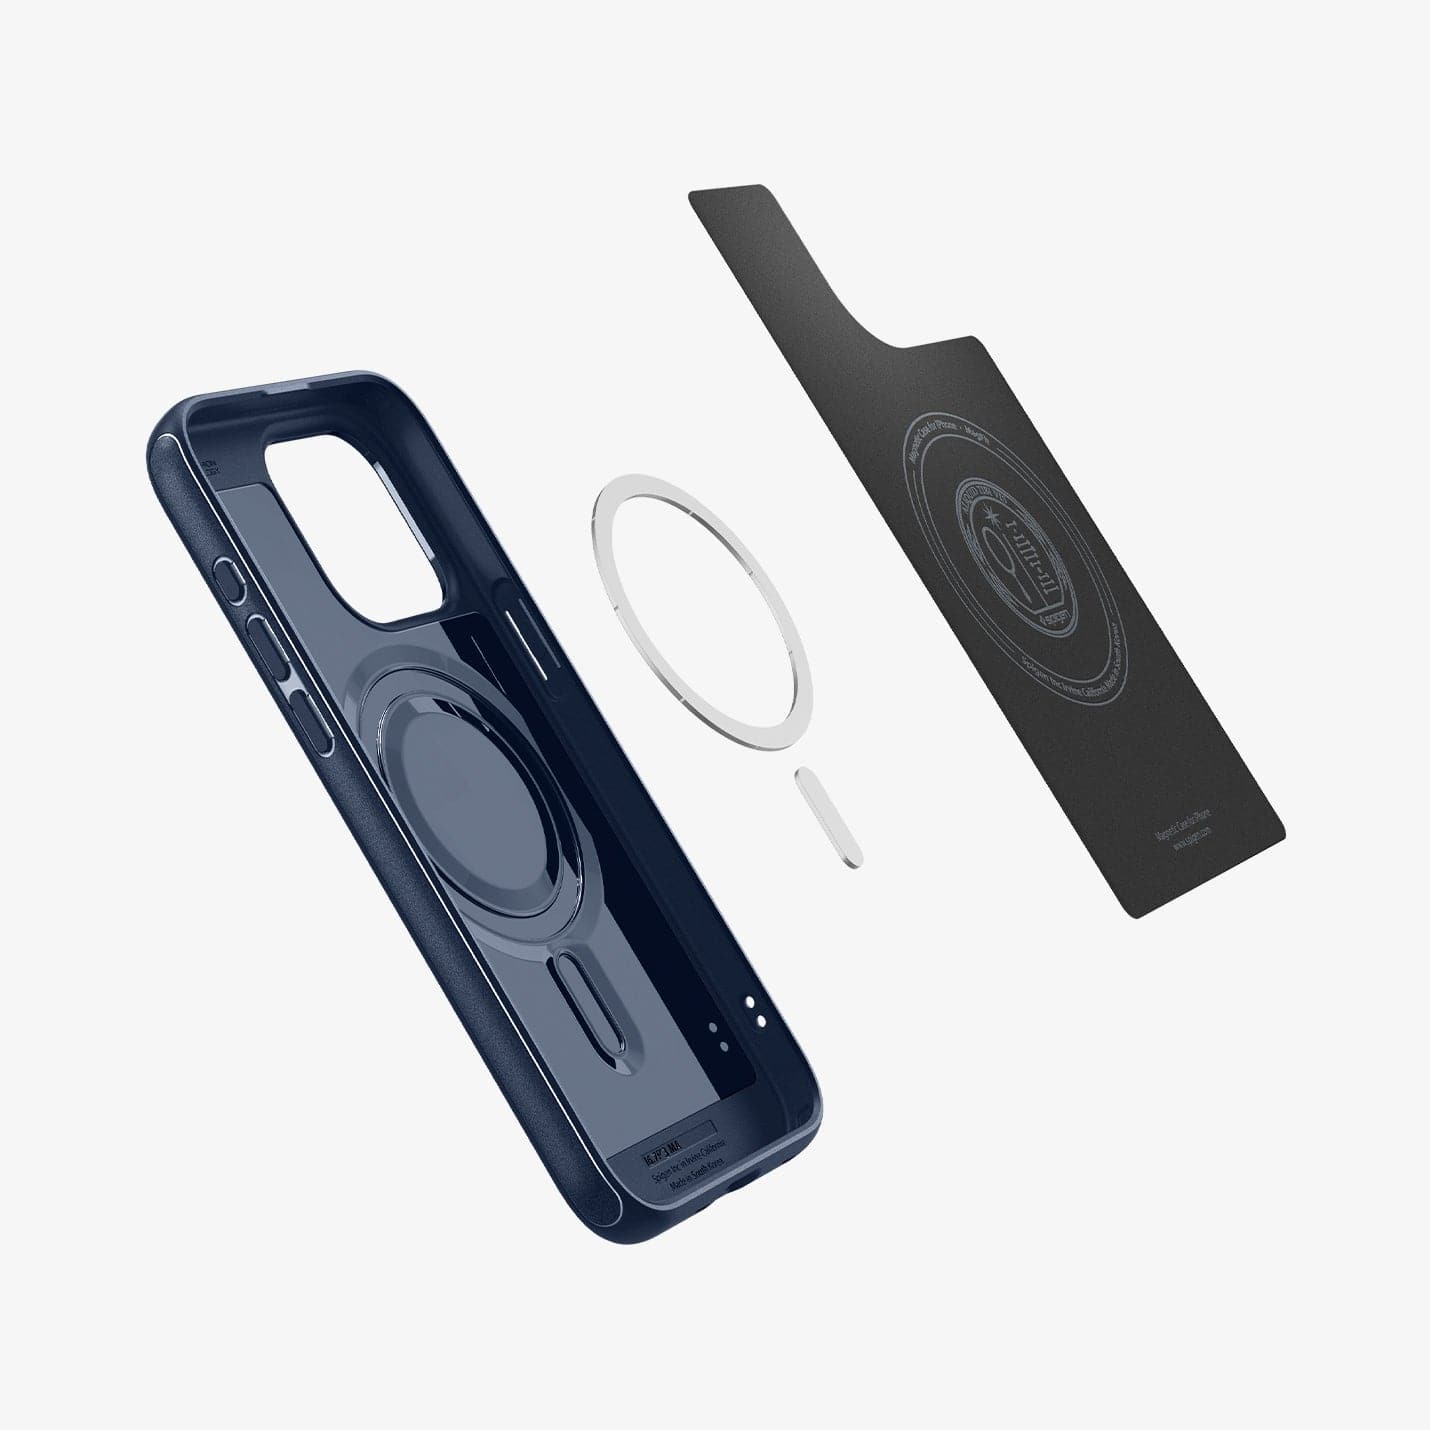 ACS06598 - iPhone 15 Pro Max Case Mag Armor (MagFit) in navy blue showing the inside magnetic ring layers